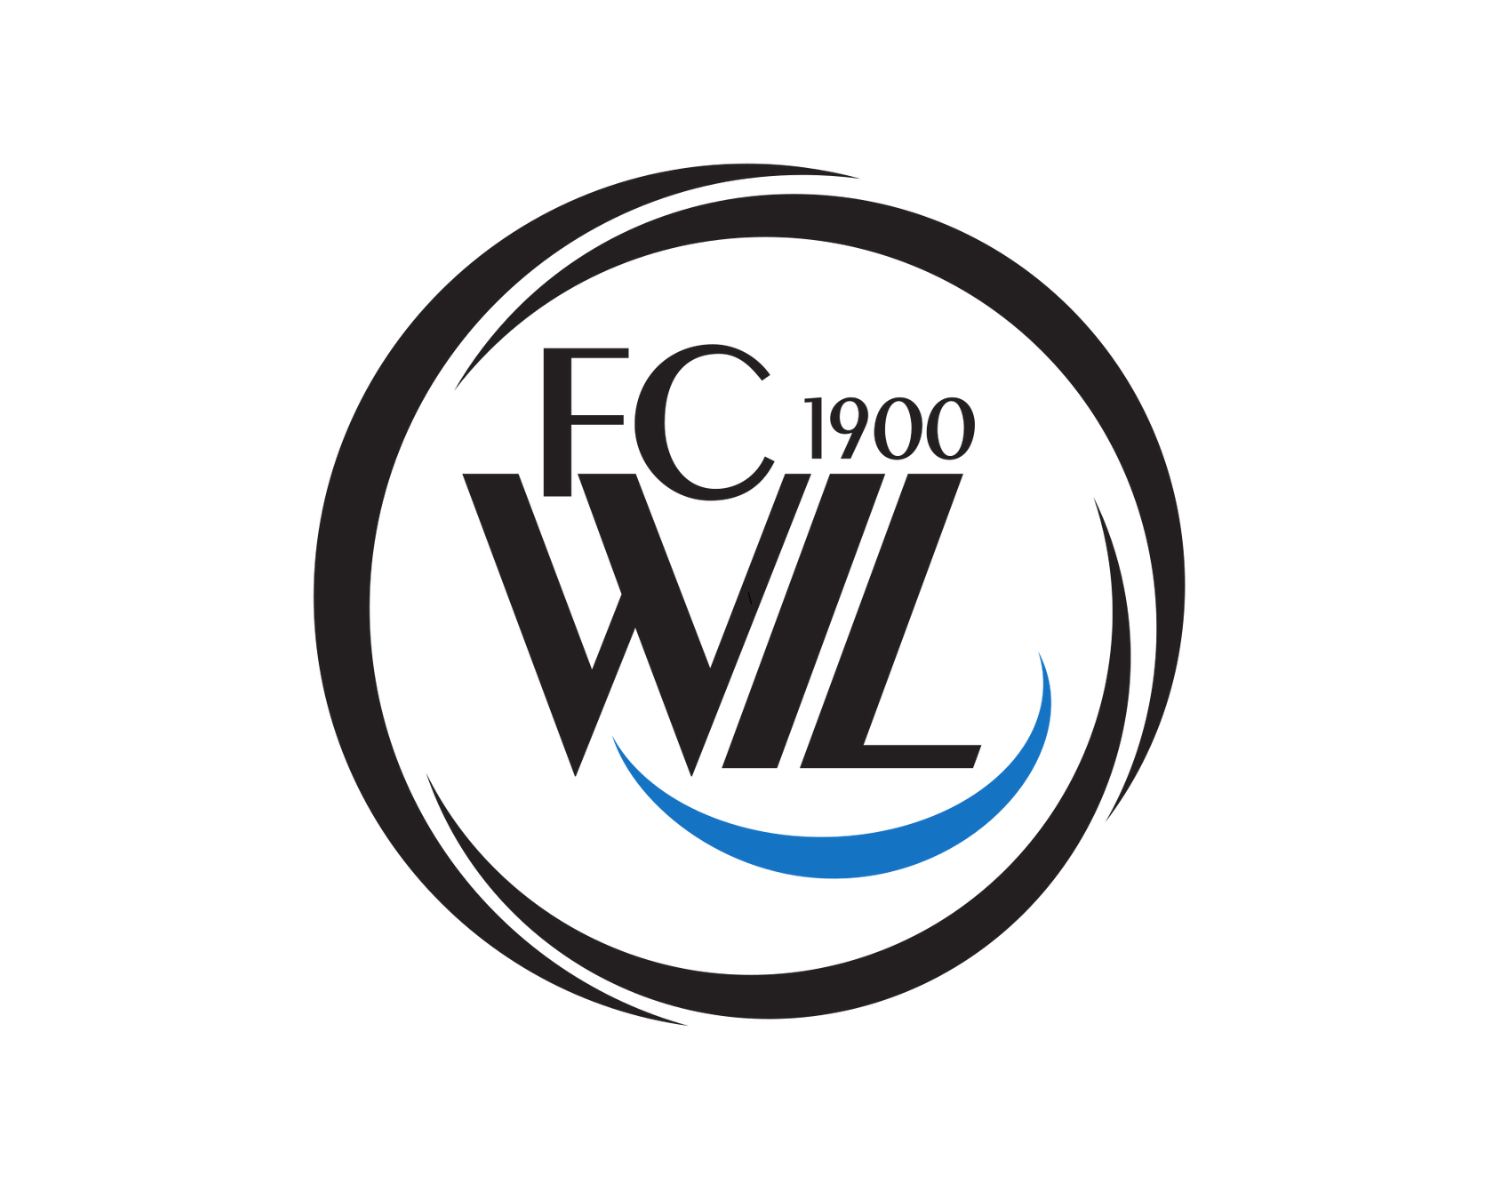 fc-wil-1900-17-football-club-facts